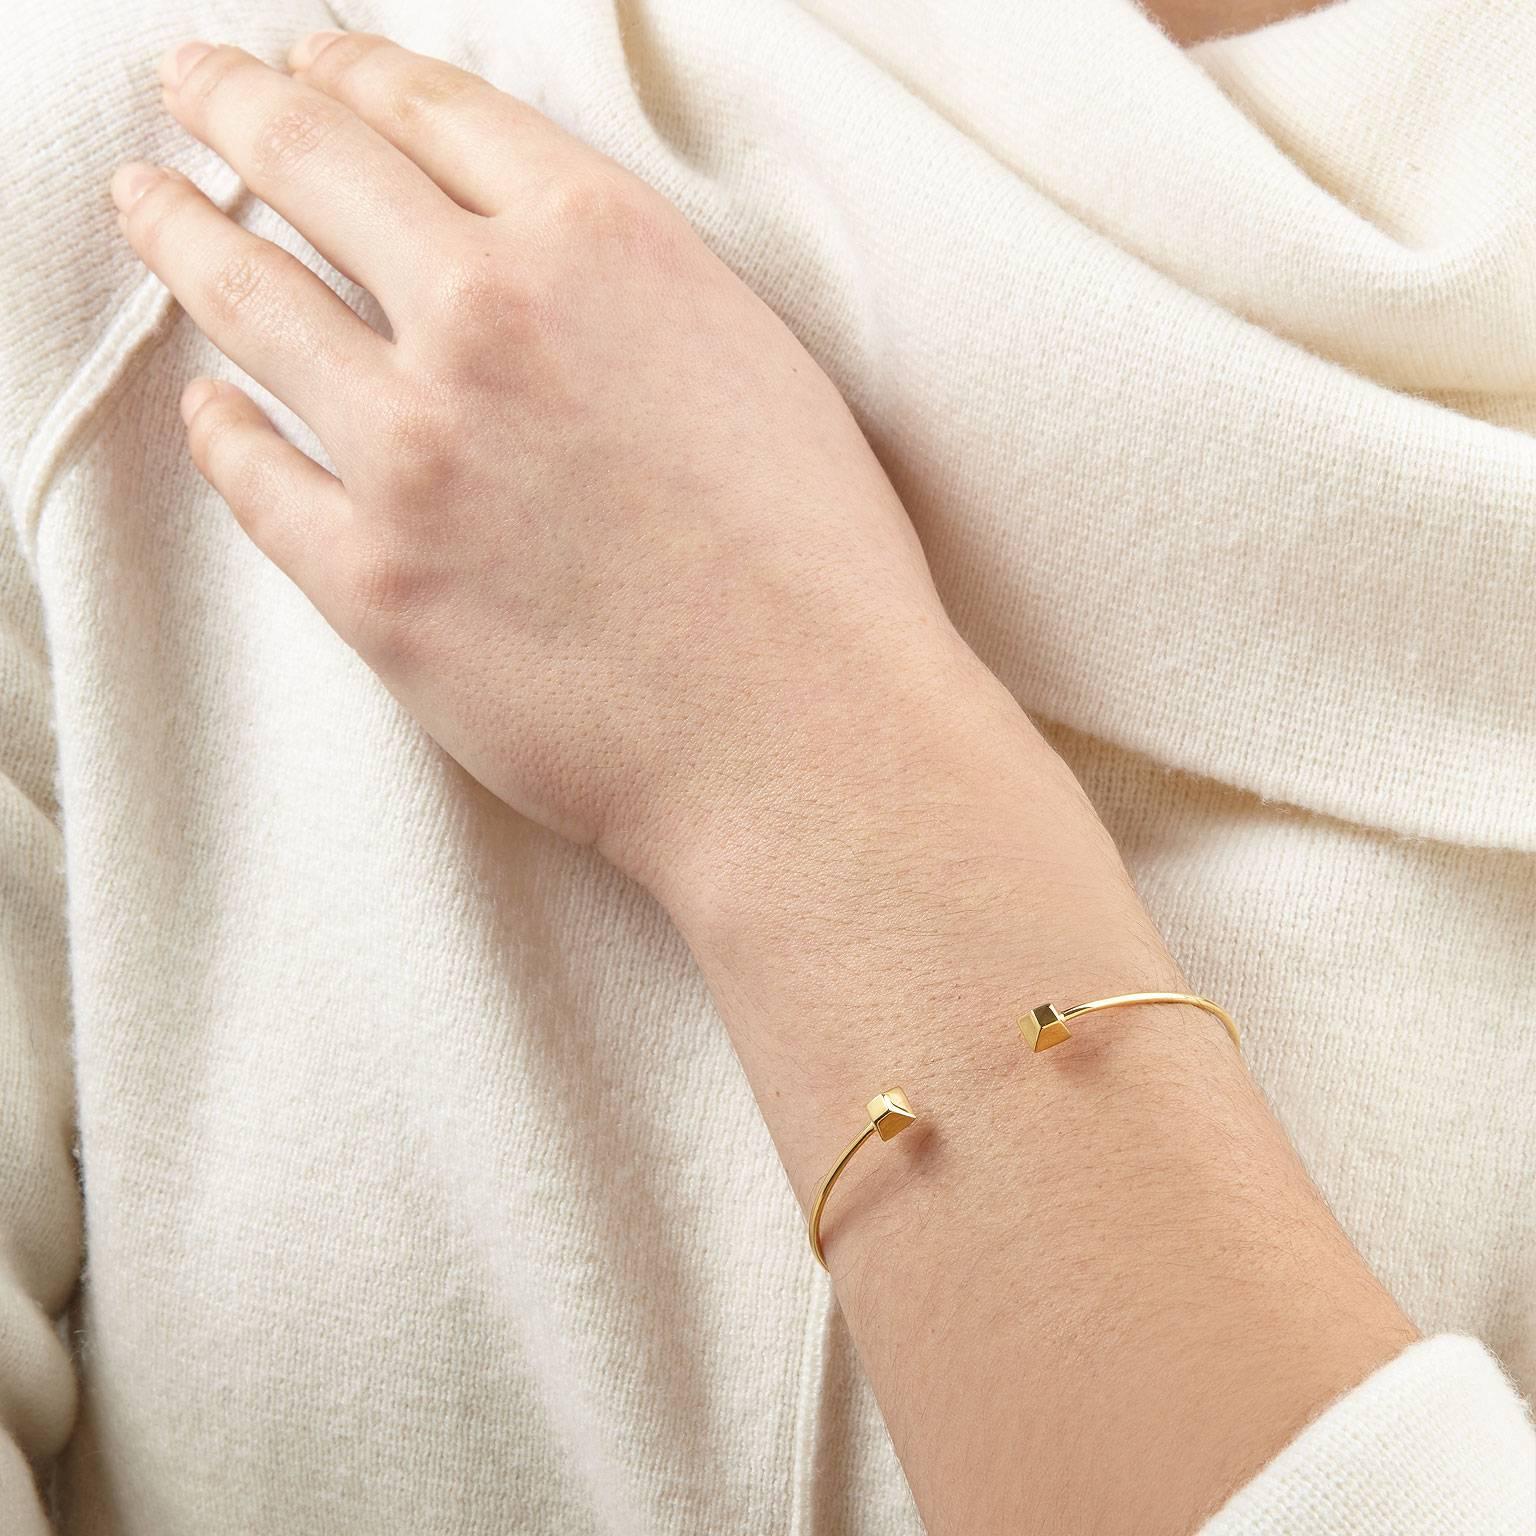 Architectural simplicity shapes this minimalist pyramid wire cuff. It is forged to bend, allowing you to slip it on effortlessly without a hinge. Wear it alone or with a selection of cuffs and bracelets stacked together.

Crafted in solid 18k yellow